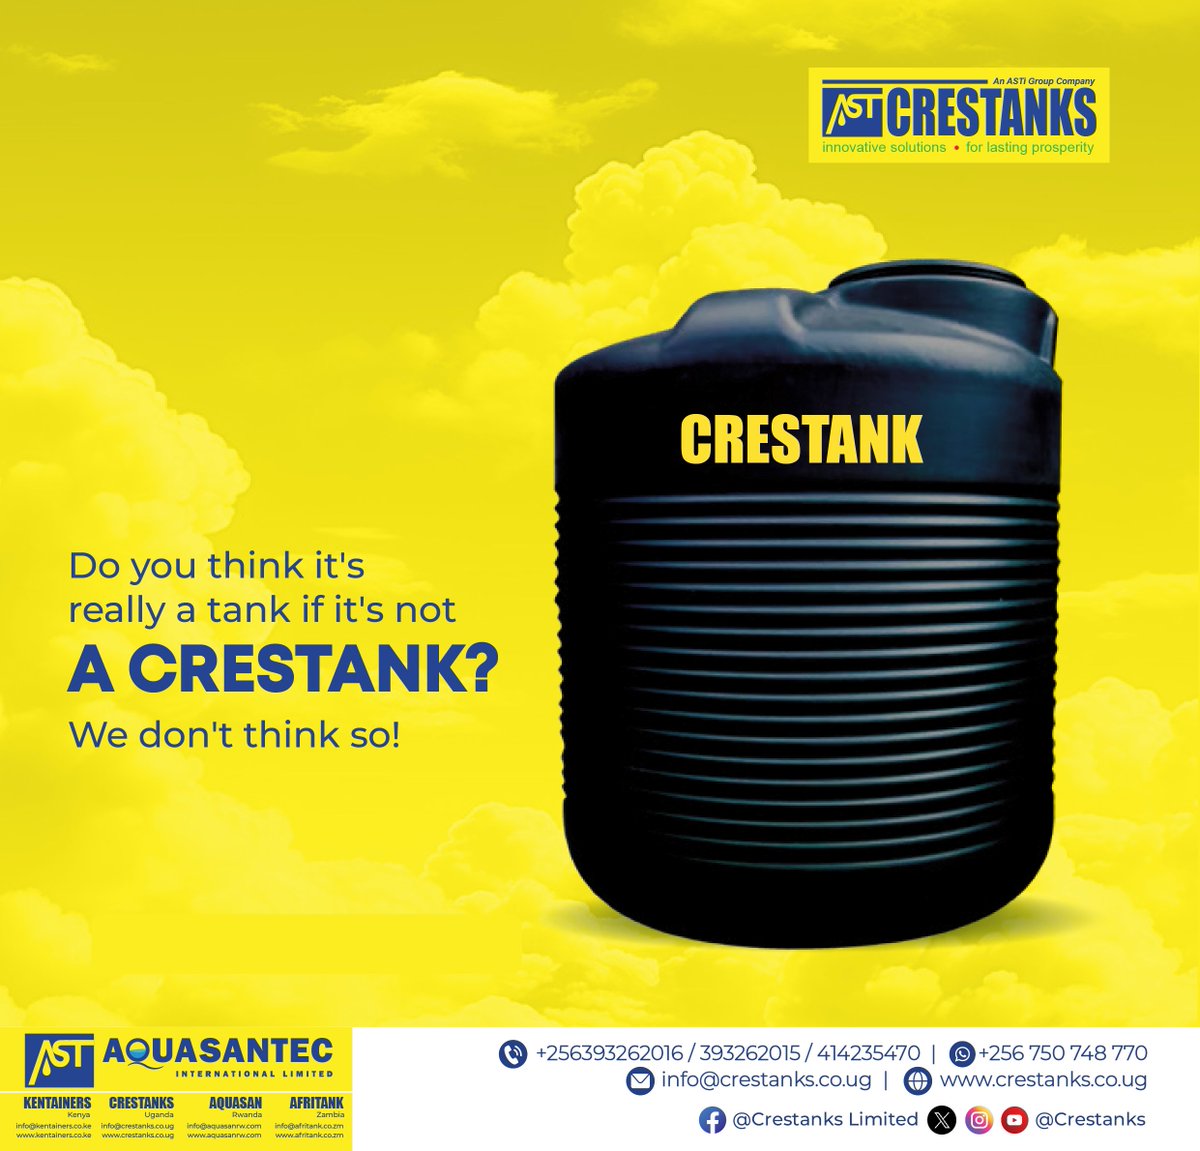 Take our word for it, the only tank you need is a CRESTANK!

Contact us on 0750748770 to place your orders.

#Crestanks #plasticproducts #watertanks